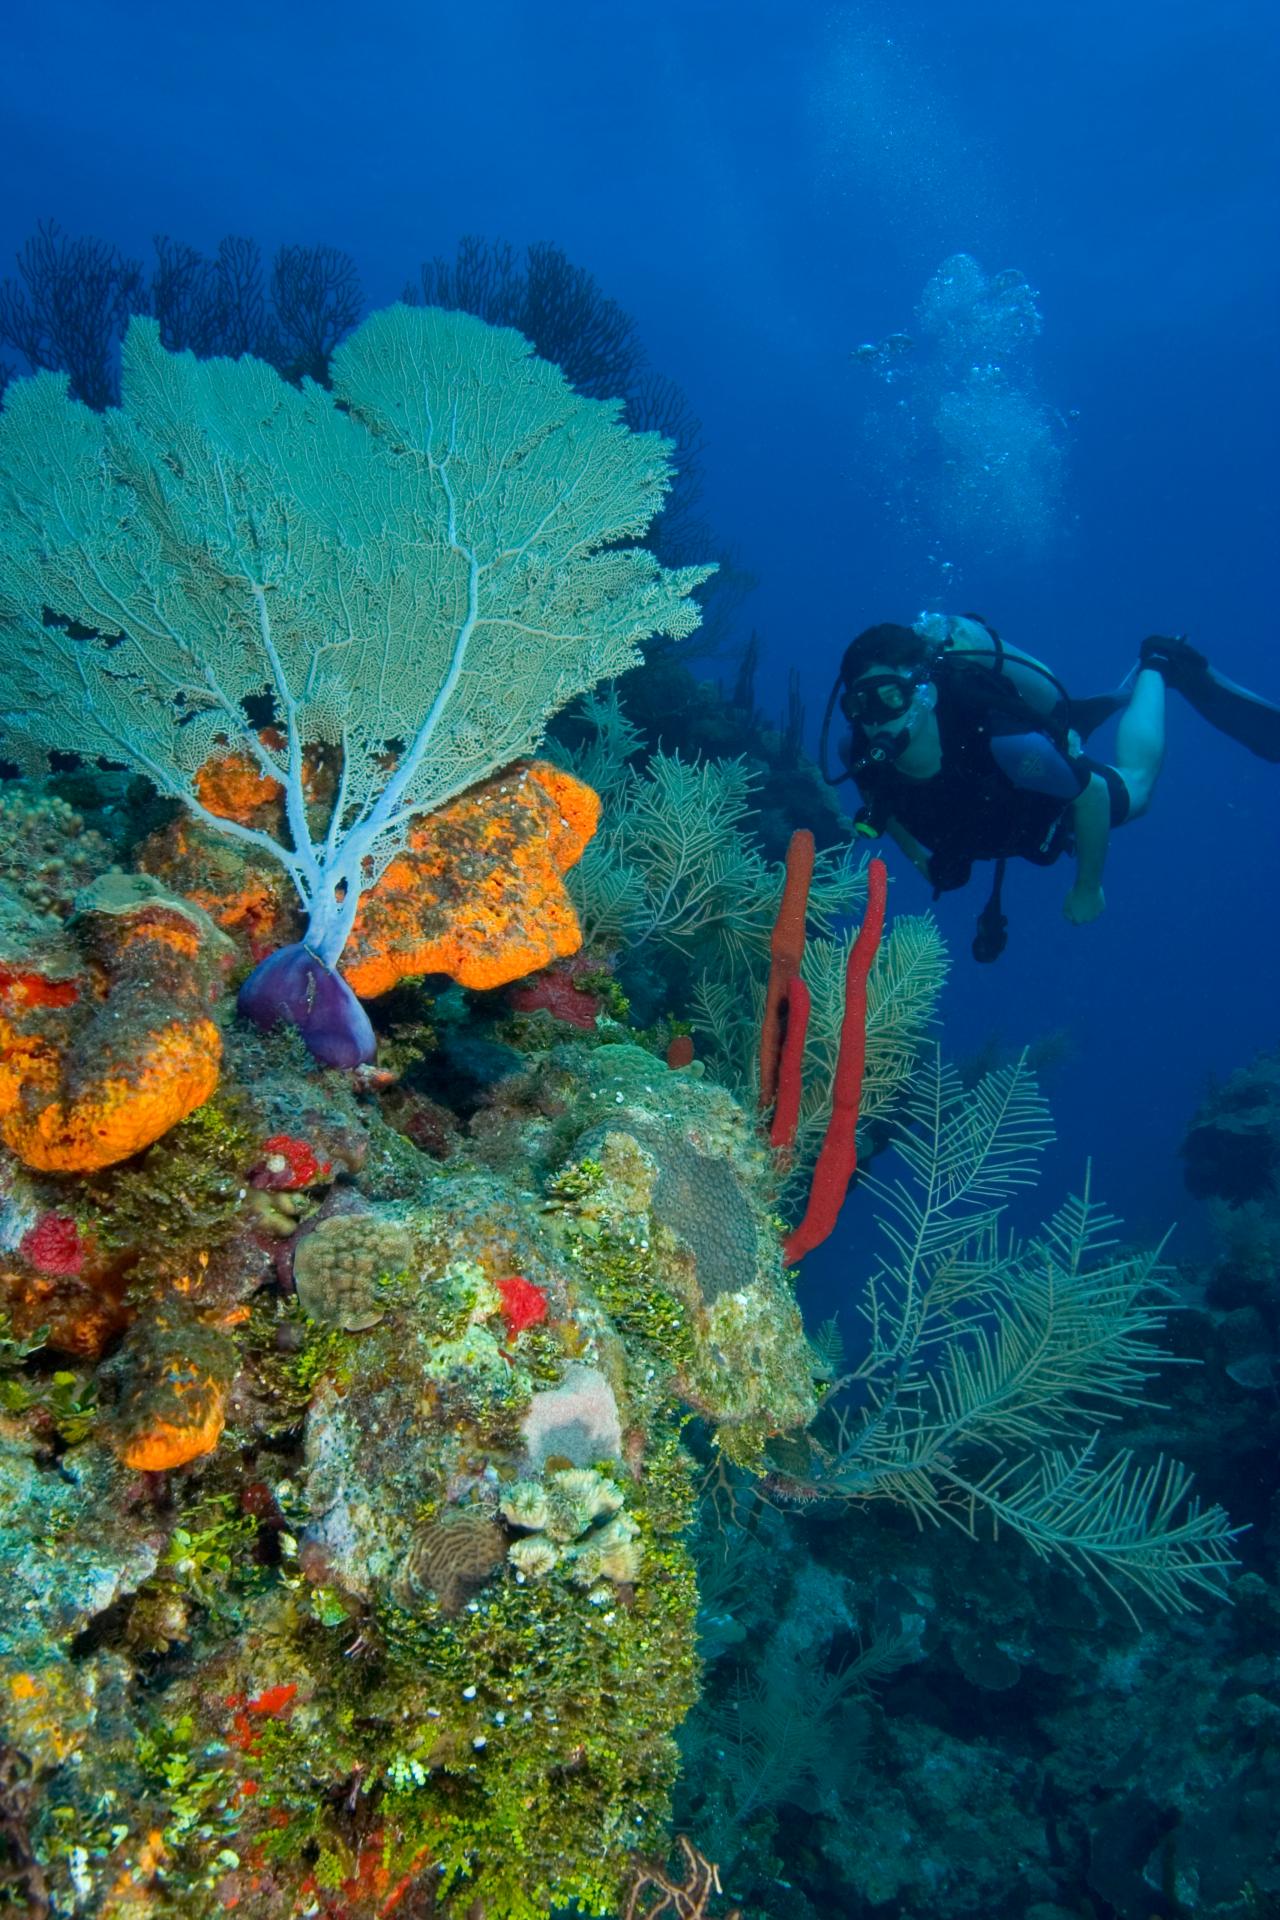 10 Most Beautiful Coral Reefs in the World